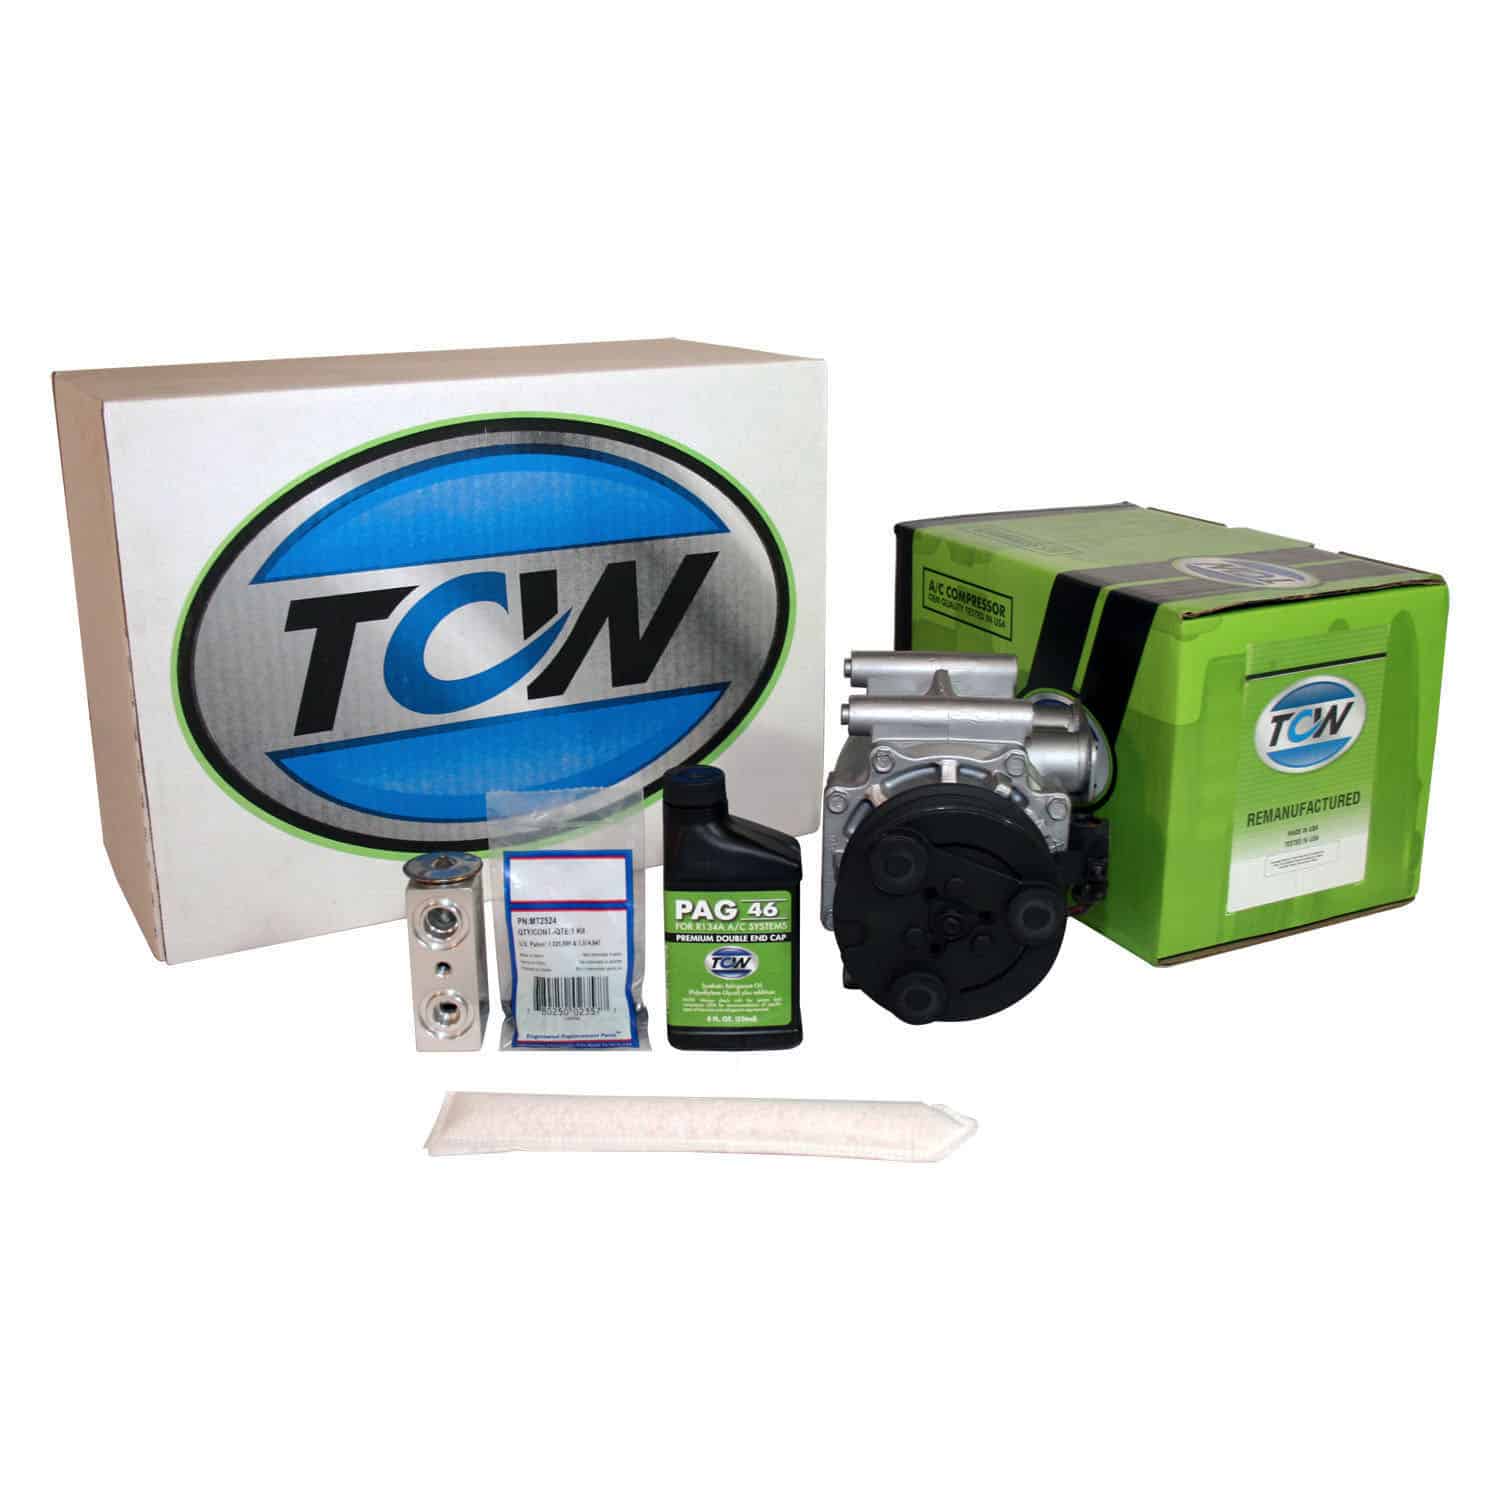 TCW Vehicle A/C Kit K1000251R Remanufactured